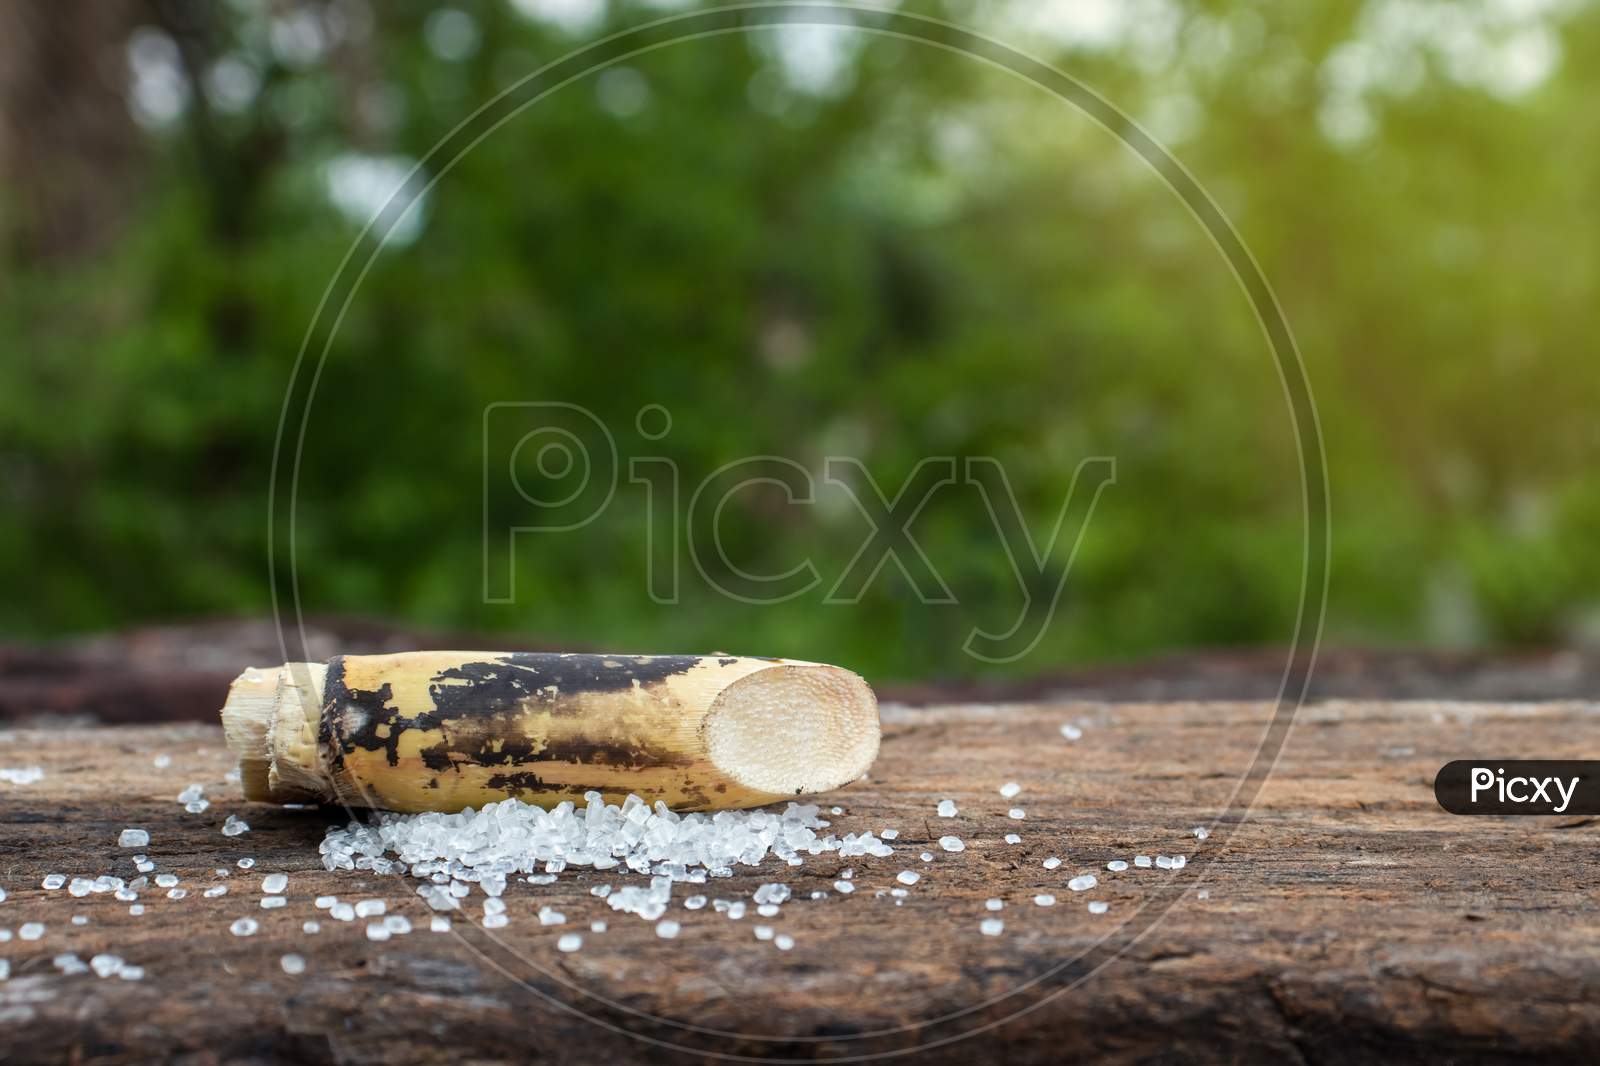 Sugarcane Piece With Sugar On Wooden Surface With Selective Focus And Copy Space For Texts Writing